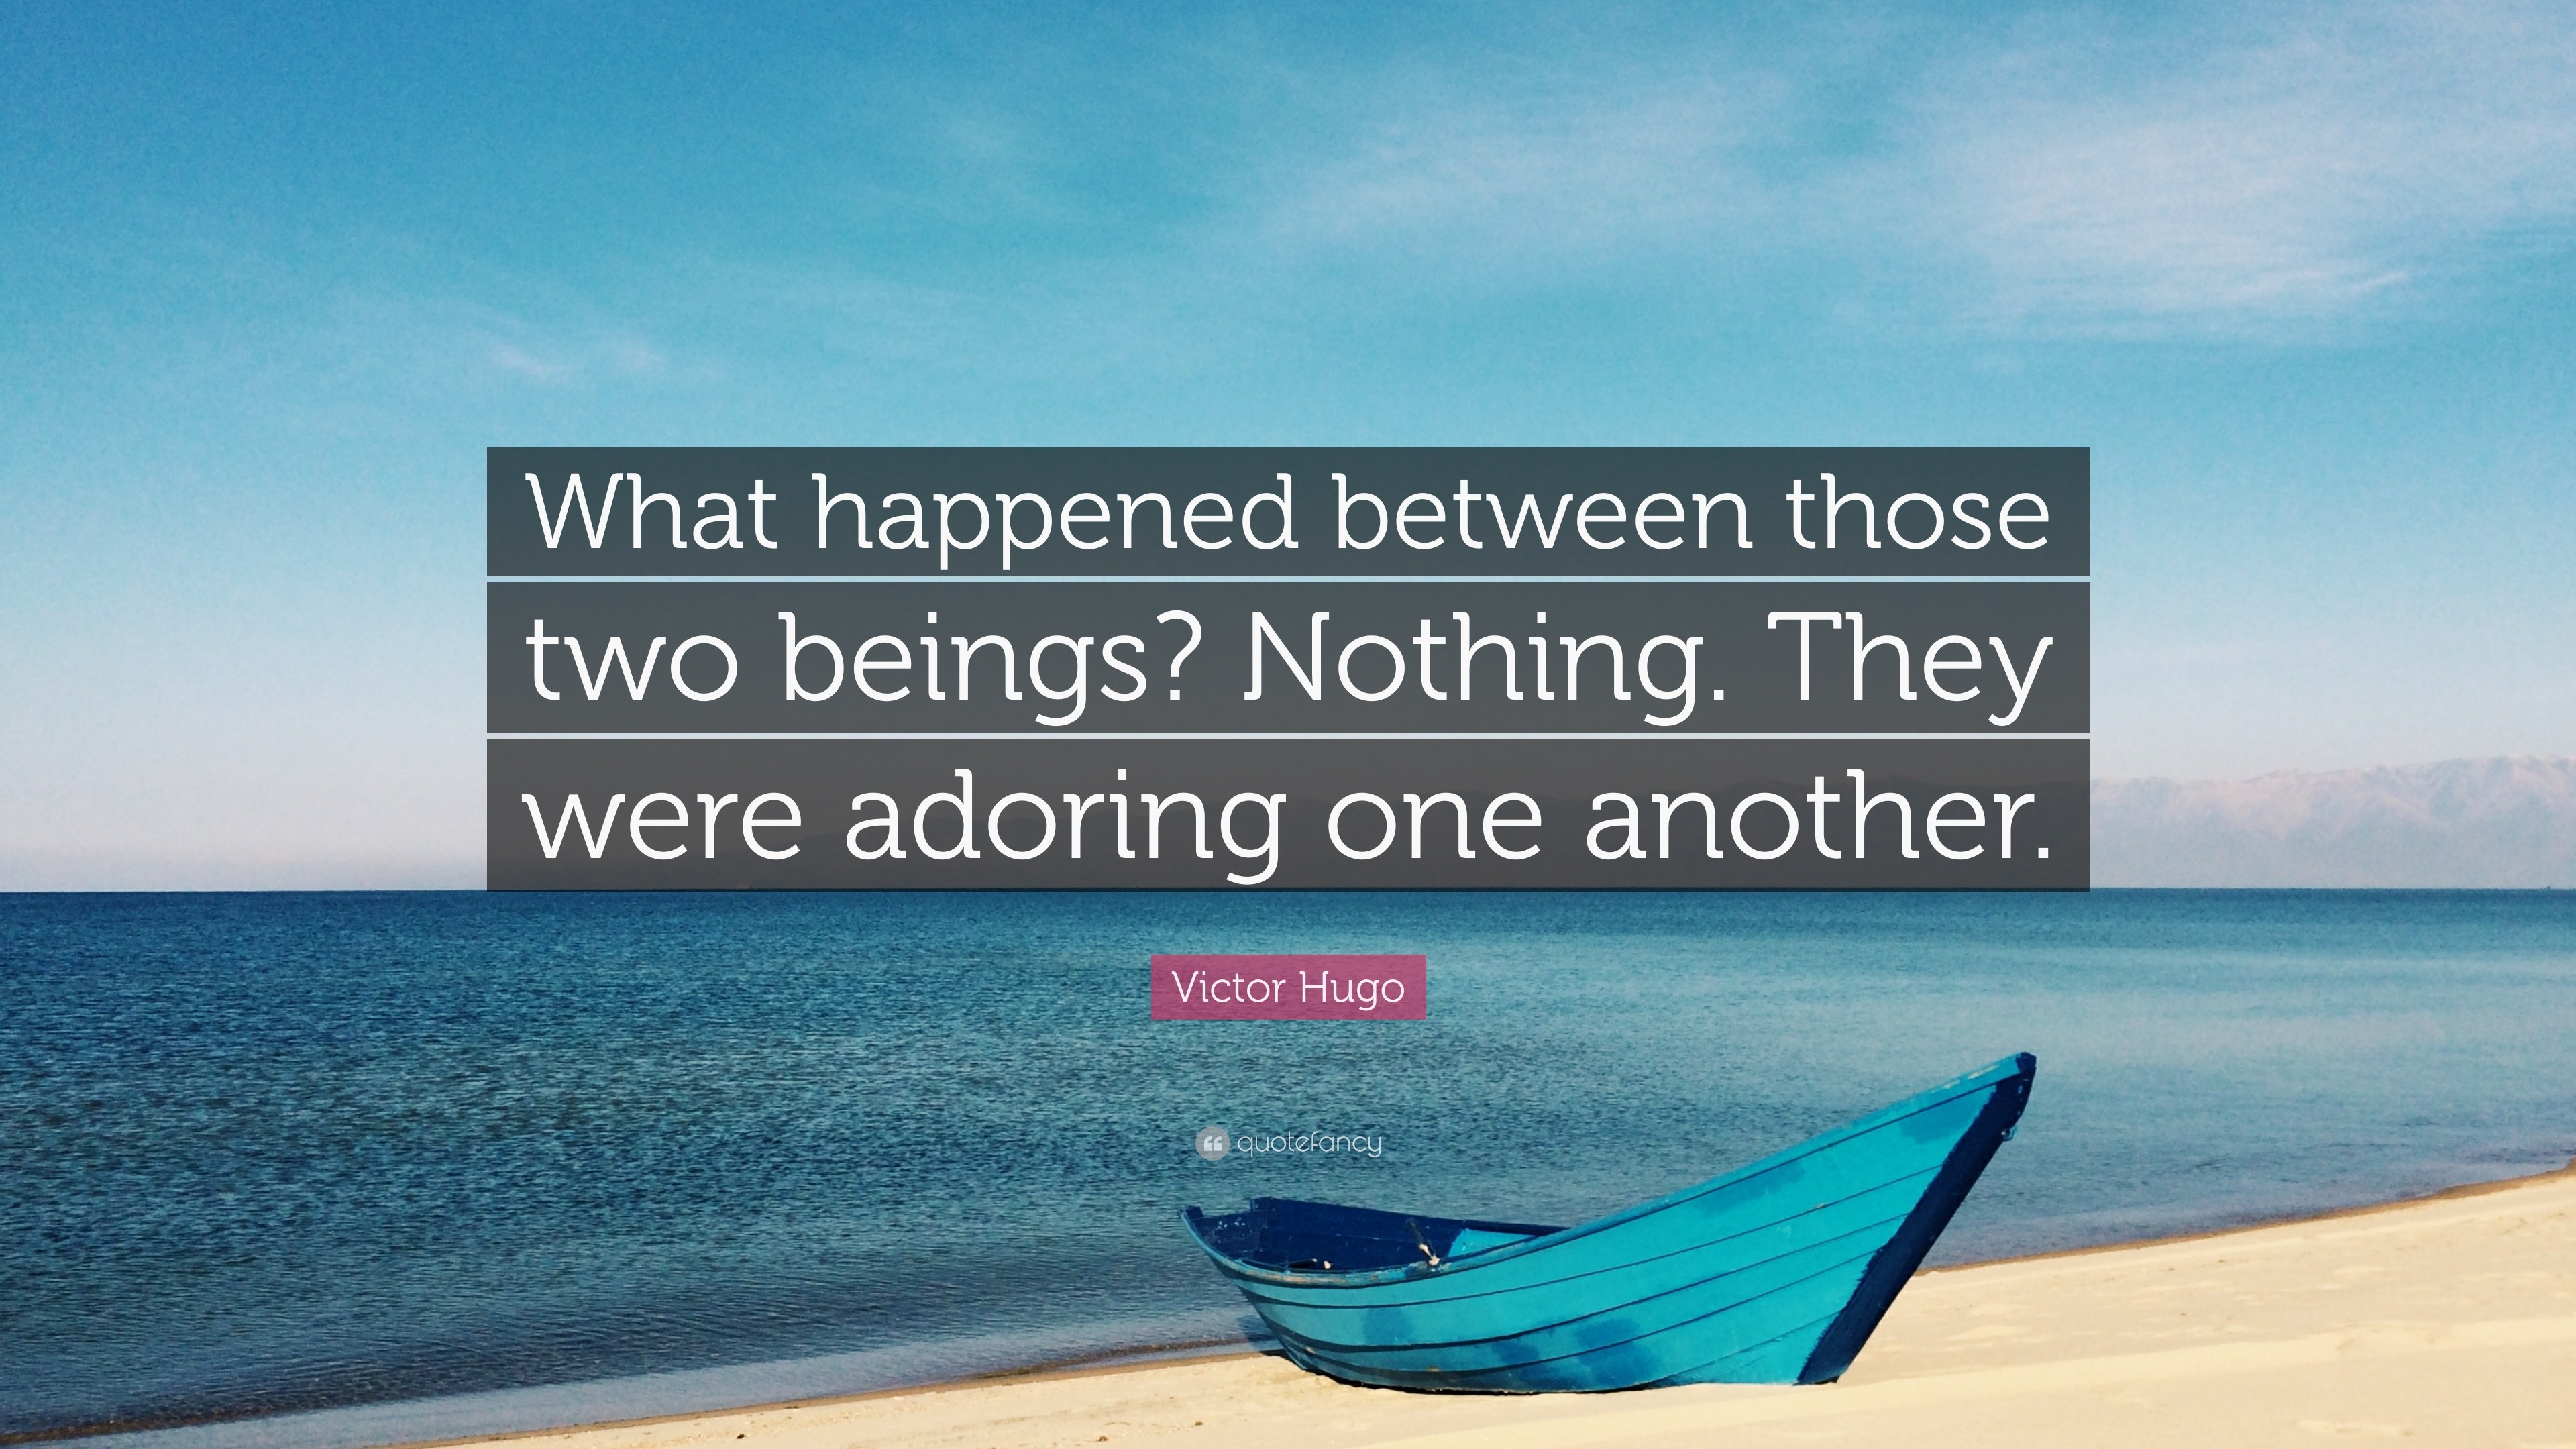 Victor Hugo Quote: “What happened between those two beings? Nothing ...